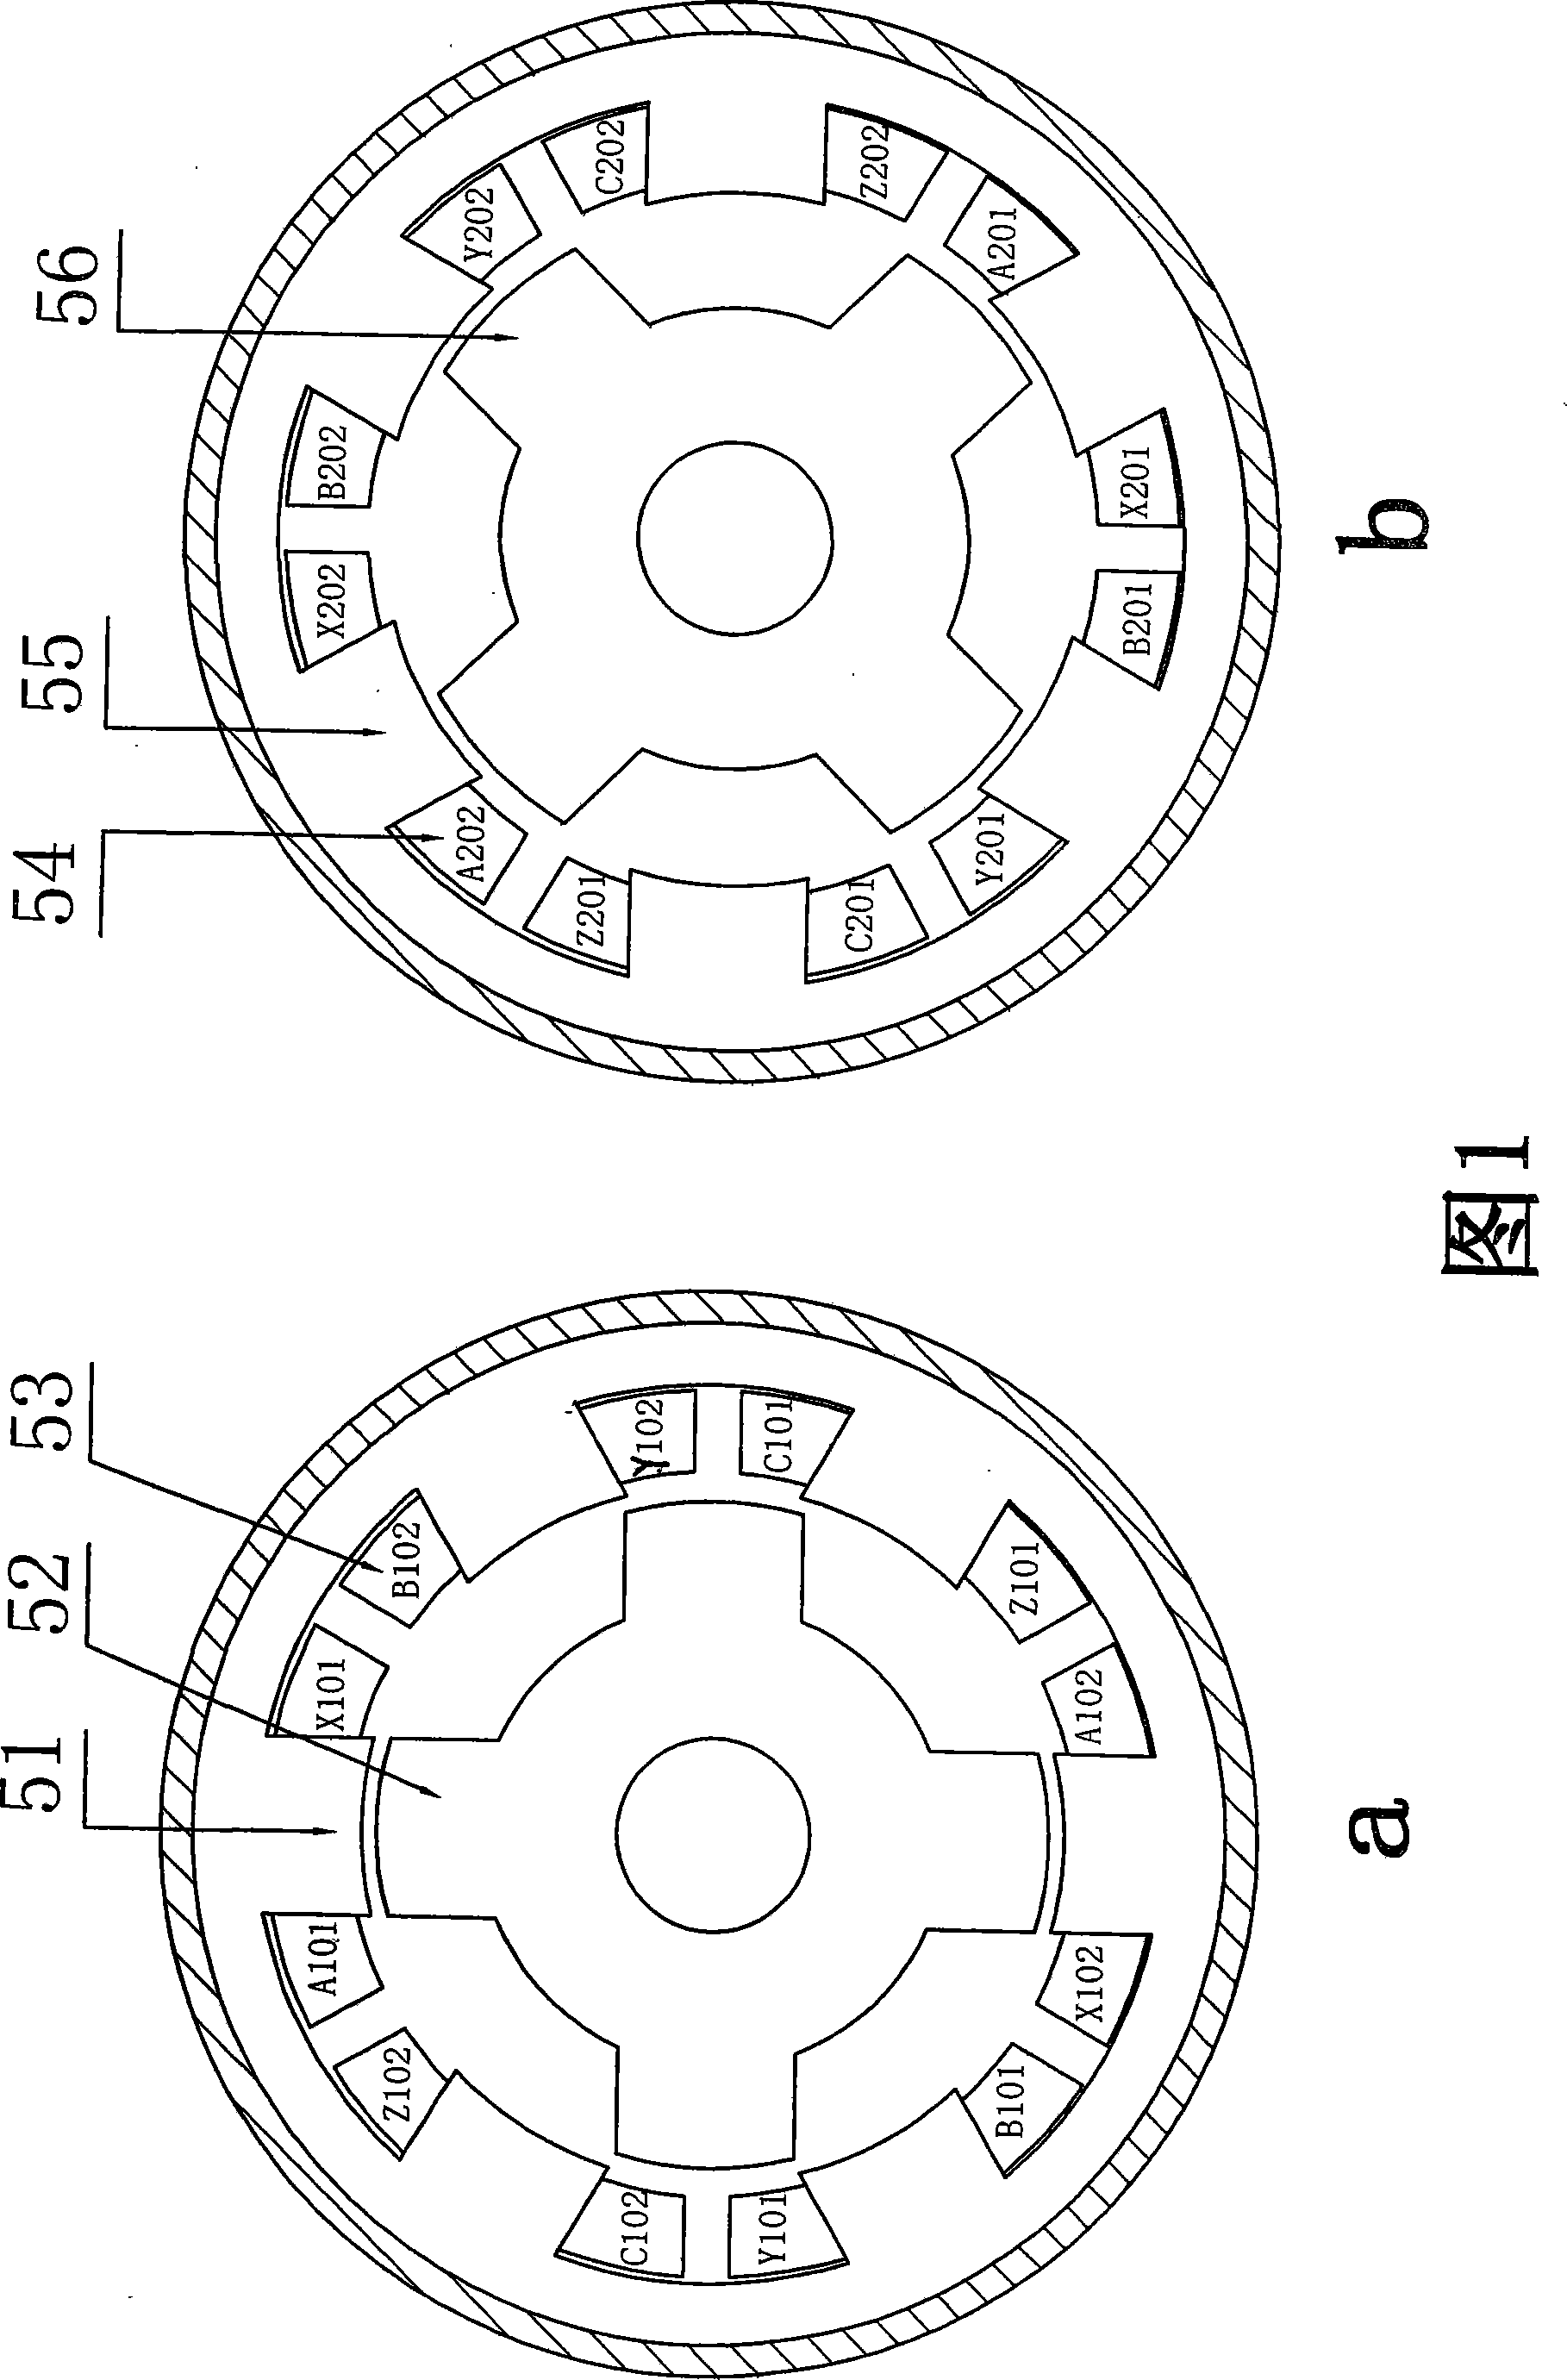 Switched reluctance motor with double stators and double rotors